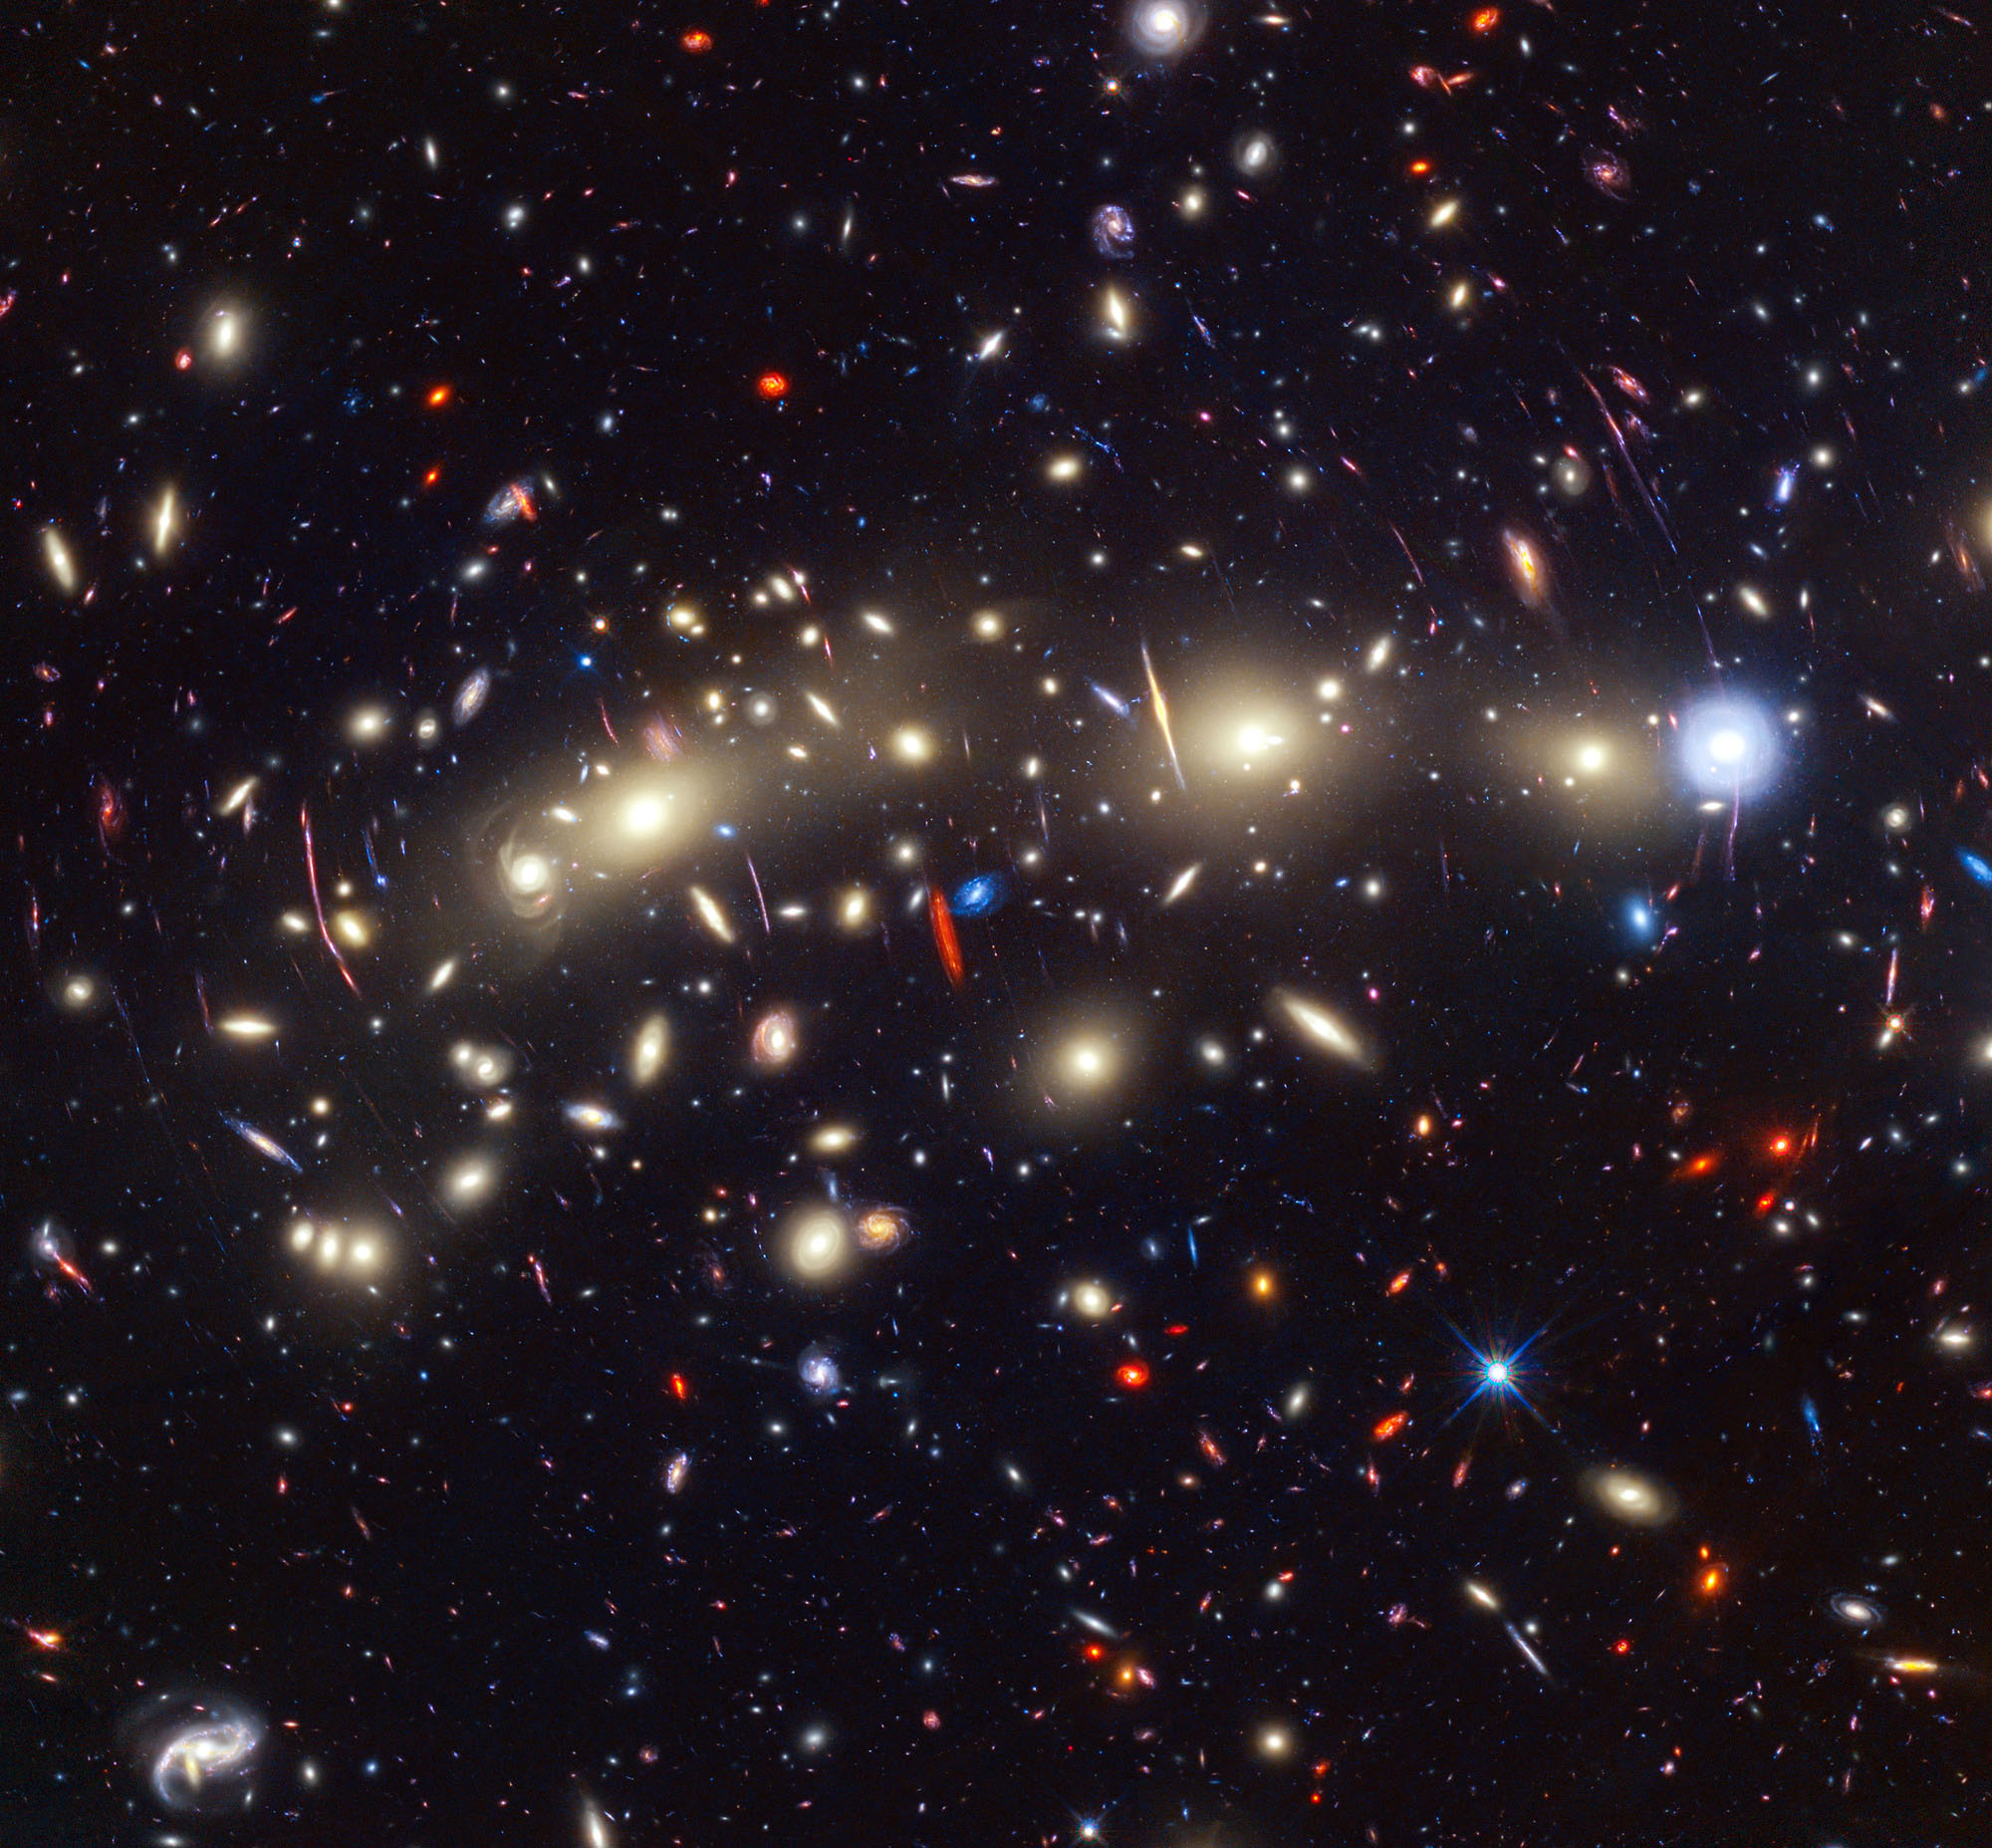 Panchromatic view of galaxy cluster MACS0416 featuring a vivid landscape of galaxies and bright individual stars. The image was created by combining infrared observations from NASA’s James Webb Space Telescope with visible-light data from NASA’s Hubble Space Telescope, resulting in a prismatic panorama of blues and reds – colors that give clues to the distances of the galaxies.